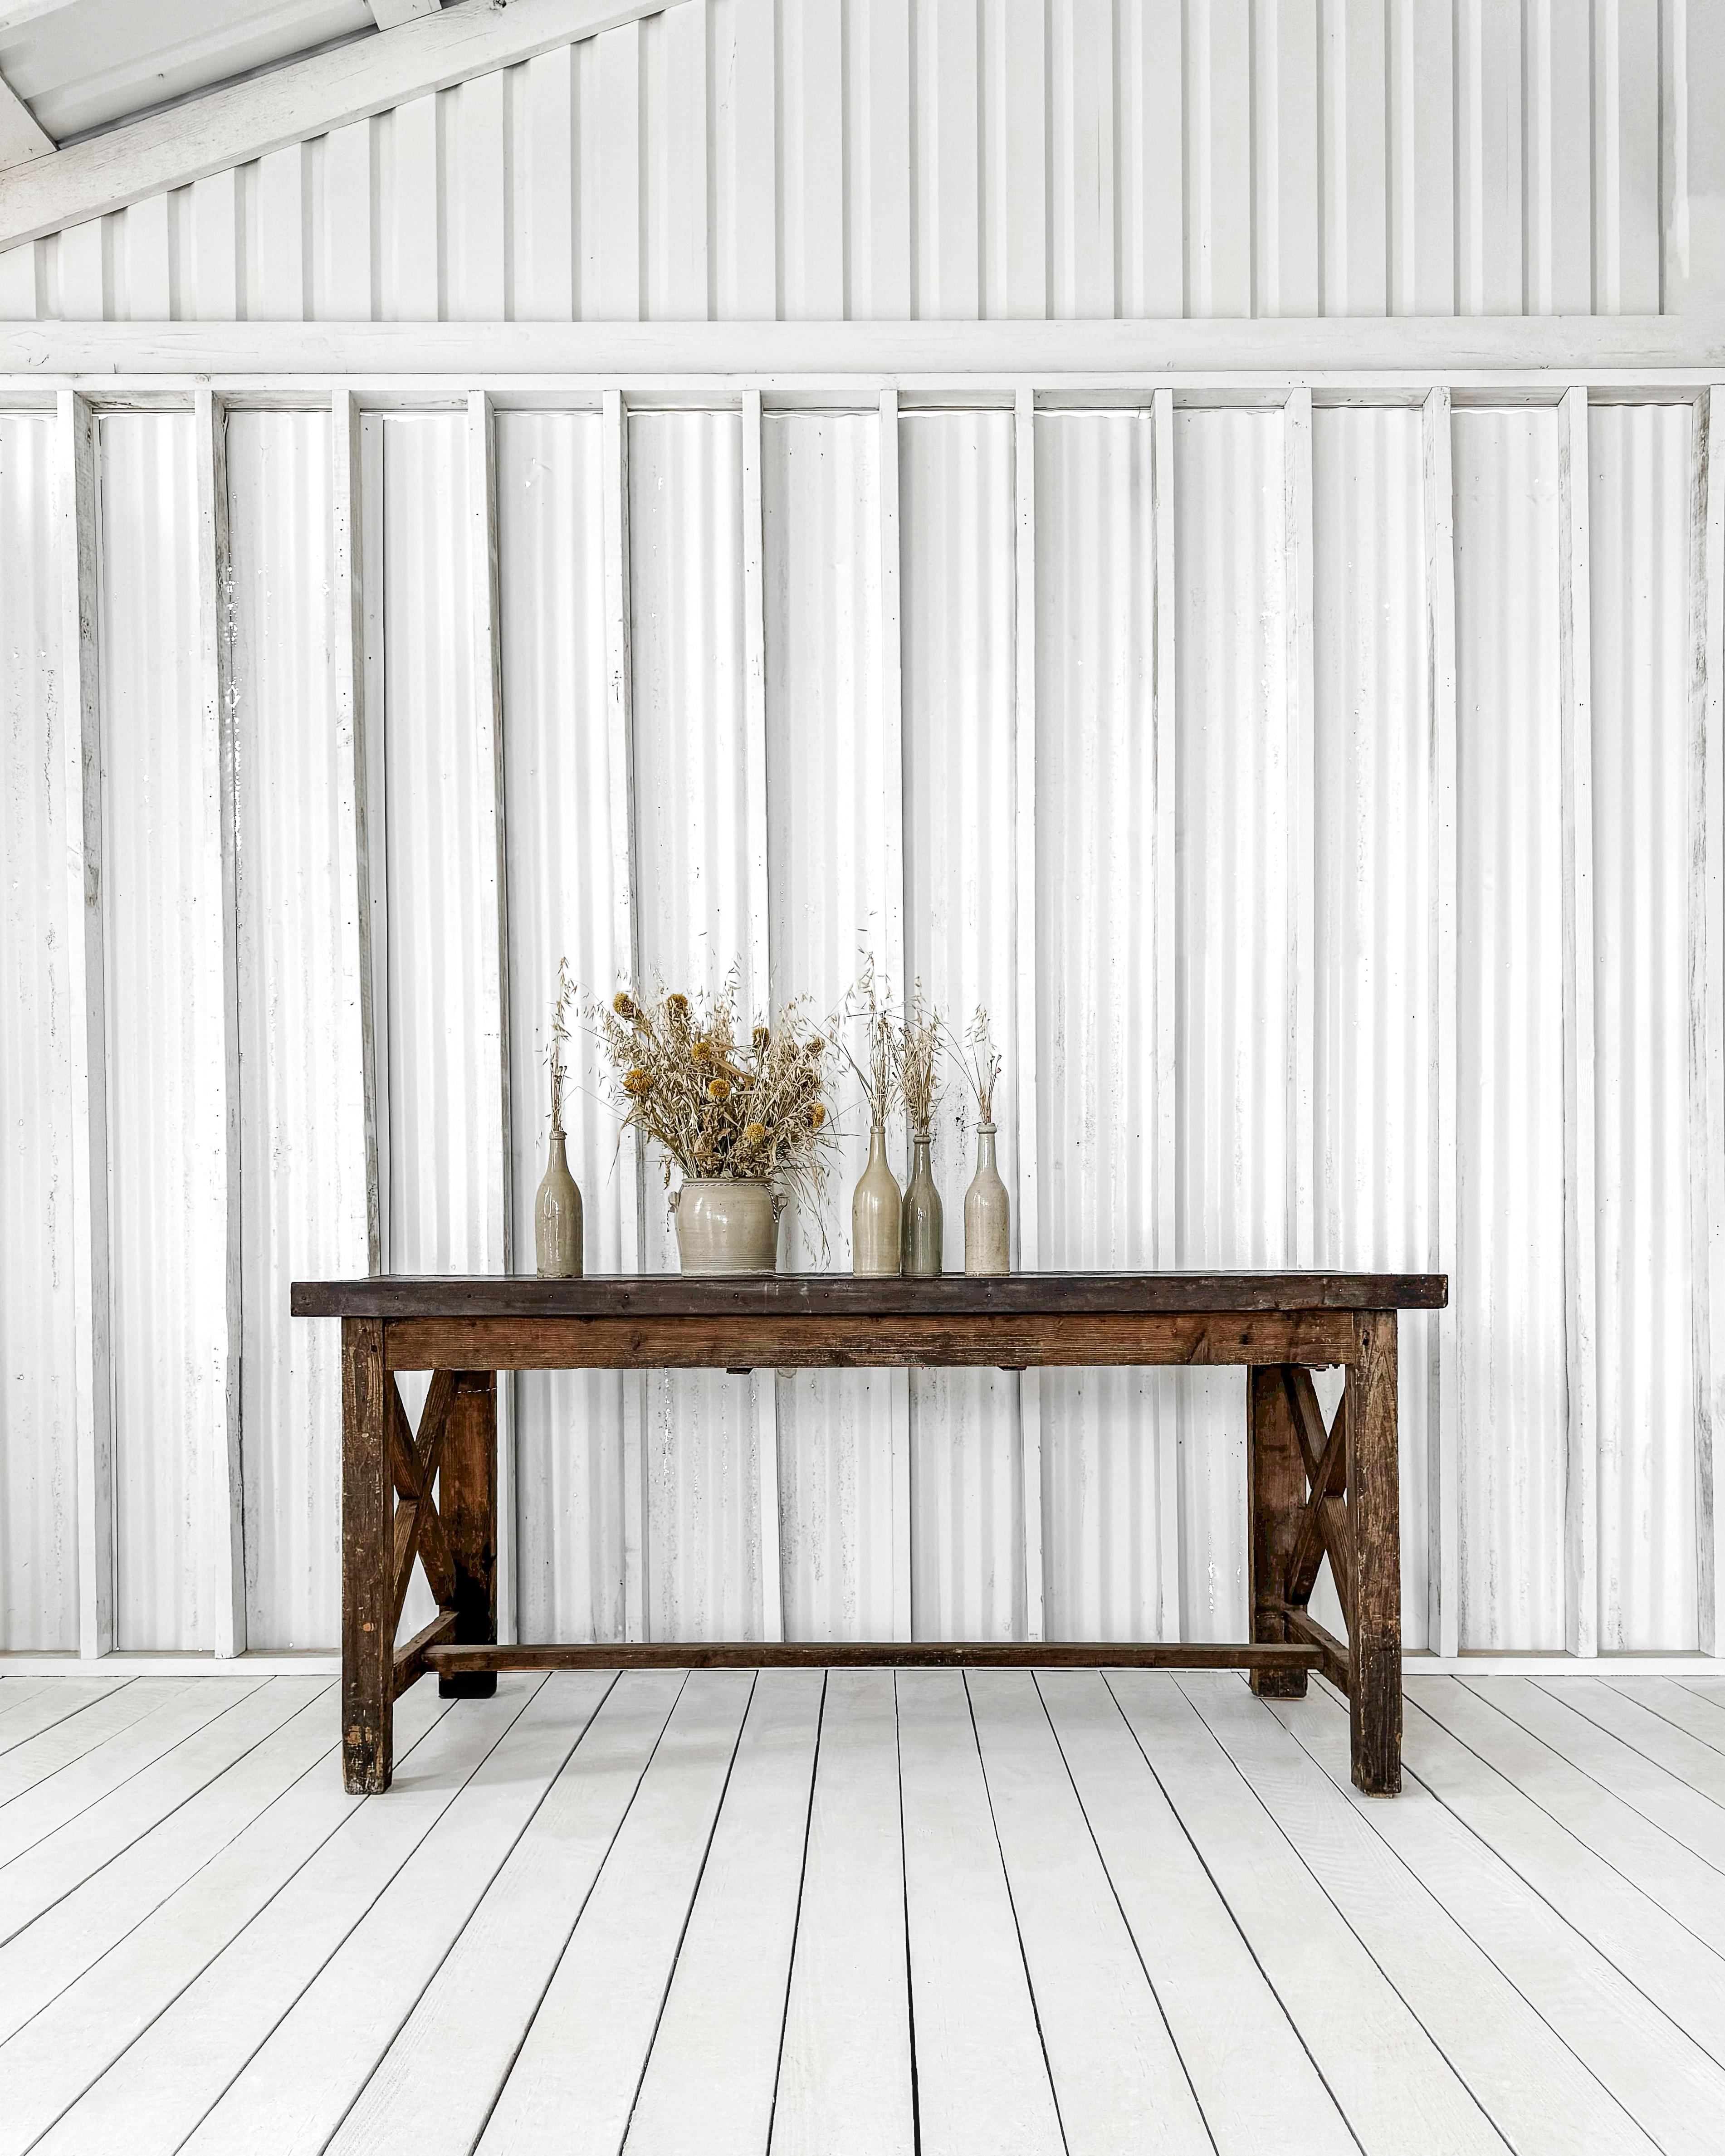 This rustic worktable with metal top is a handcrafted masterpiece featuring timeless craftsmanship. Crafted with meticulous attention to detail and pegged joinery by a skilled carpenter of the past, this remarkable worktable is the statement piece